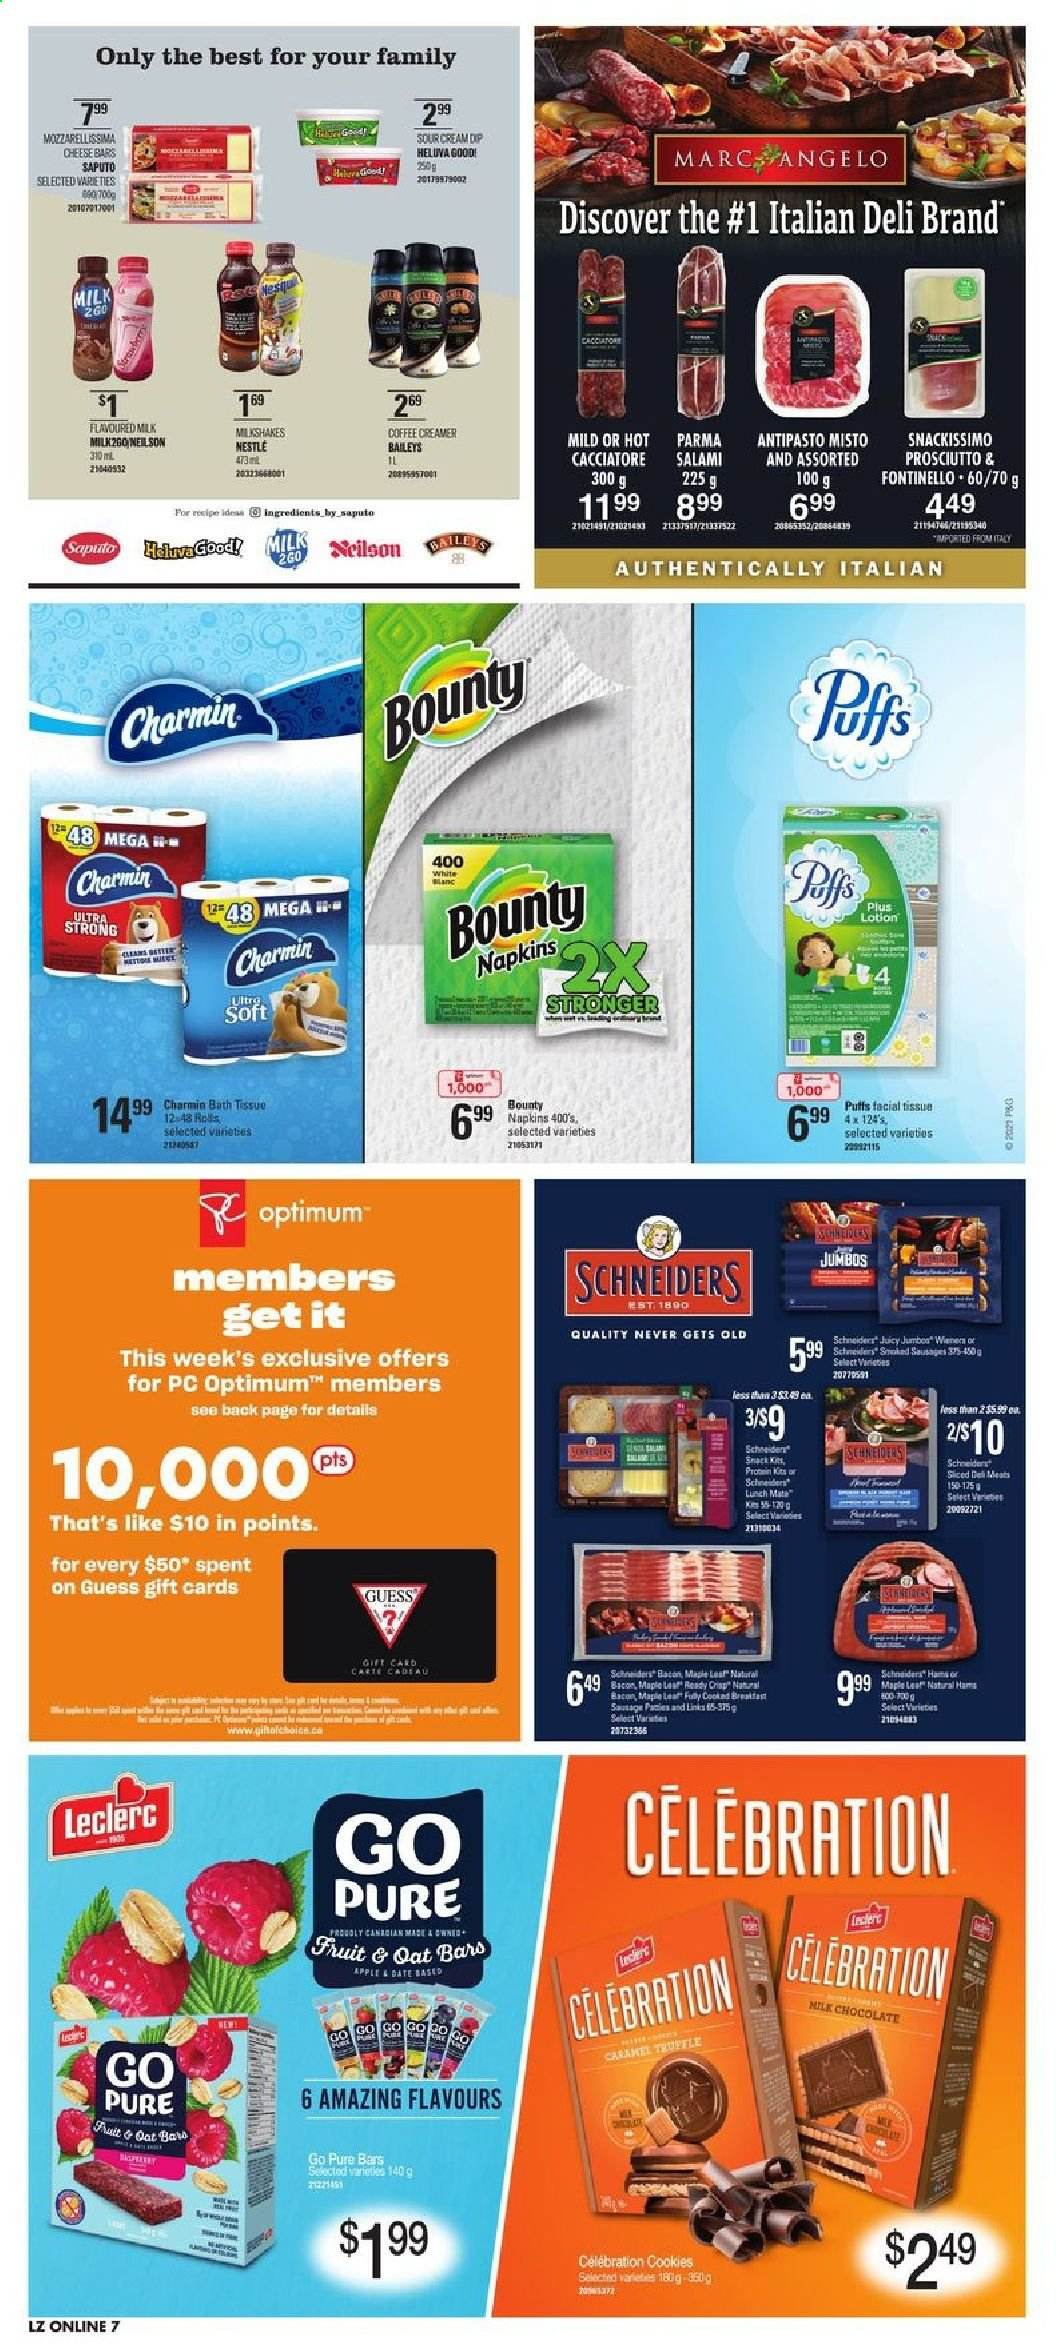 thumbnail - Loblaws Flyer - January 14, 2021 - January 20, 2021 - Sales products - bacon, salami, prosciutto, sausage, cheese, creamer, cookies, milk chocolate, chocolate, snack, Bounty, truffles, Celebration, oats, Baileys, napkins, bath tissue, Charmin, body lotion, Guess, Optimum, Nestlé. Page 12.